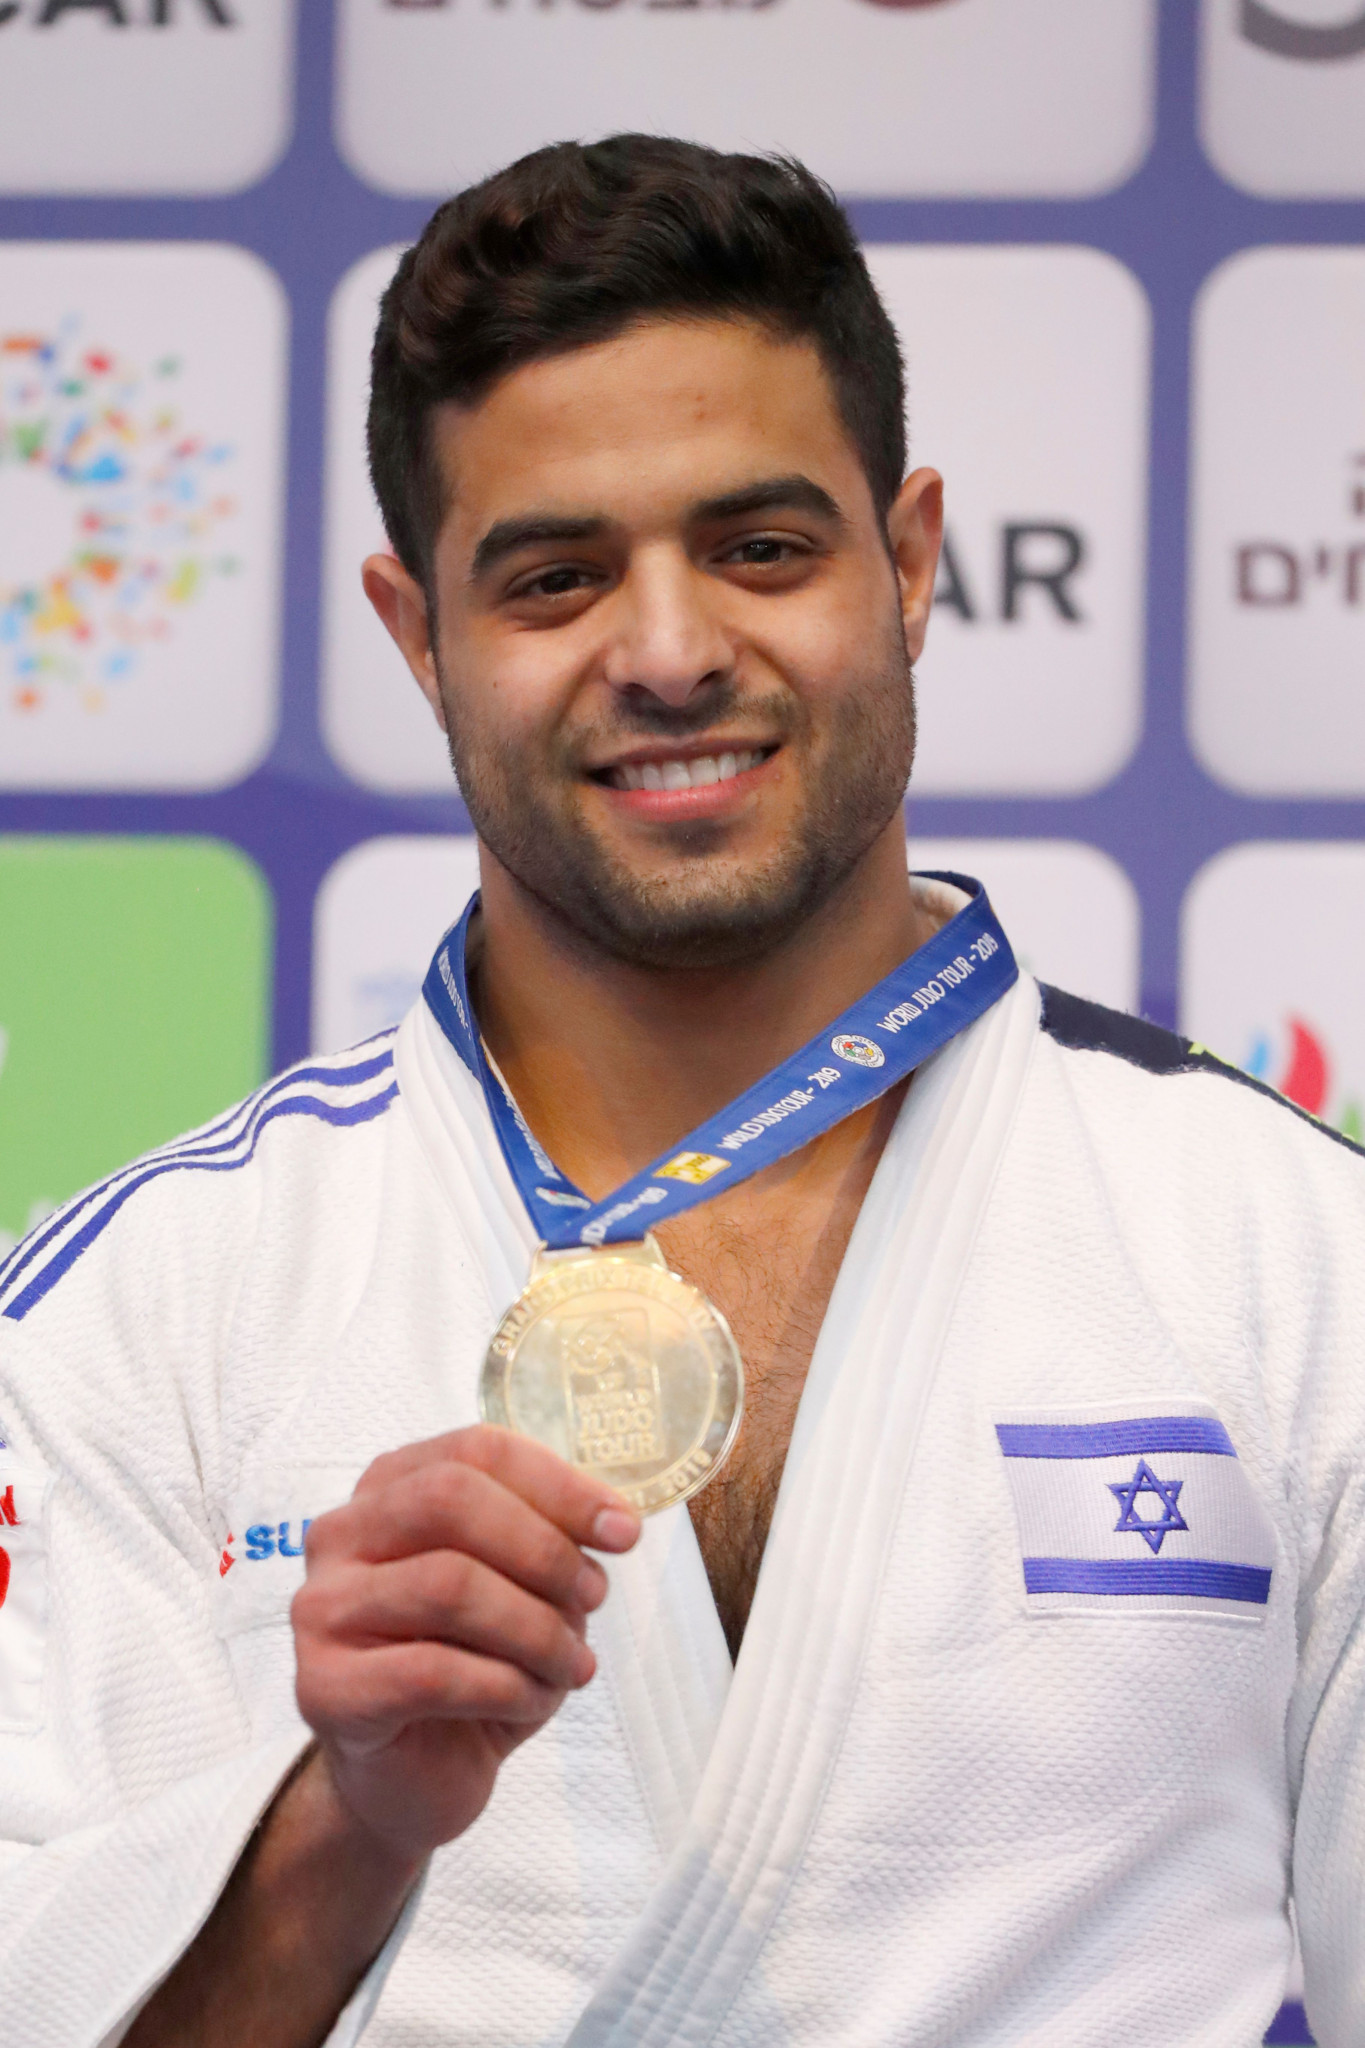 Israel's Sagi Muki was shortlisted for male judoka of 2019-2020 at the IJF Awards, and also won the Ippon of the Year honour ©IJF